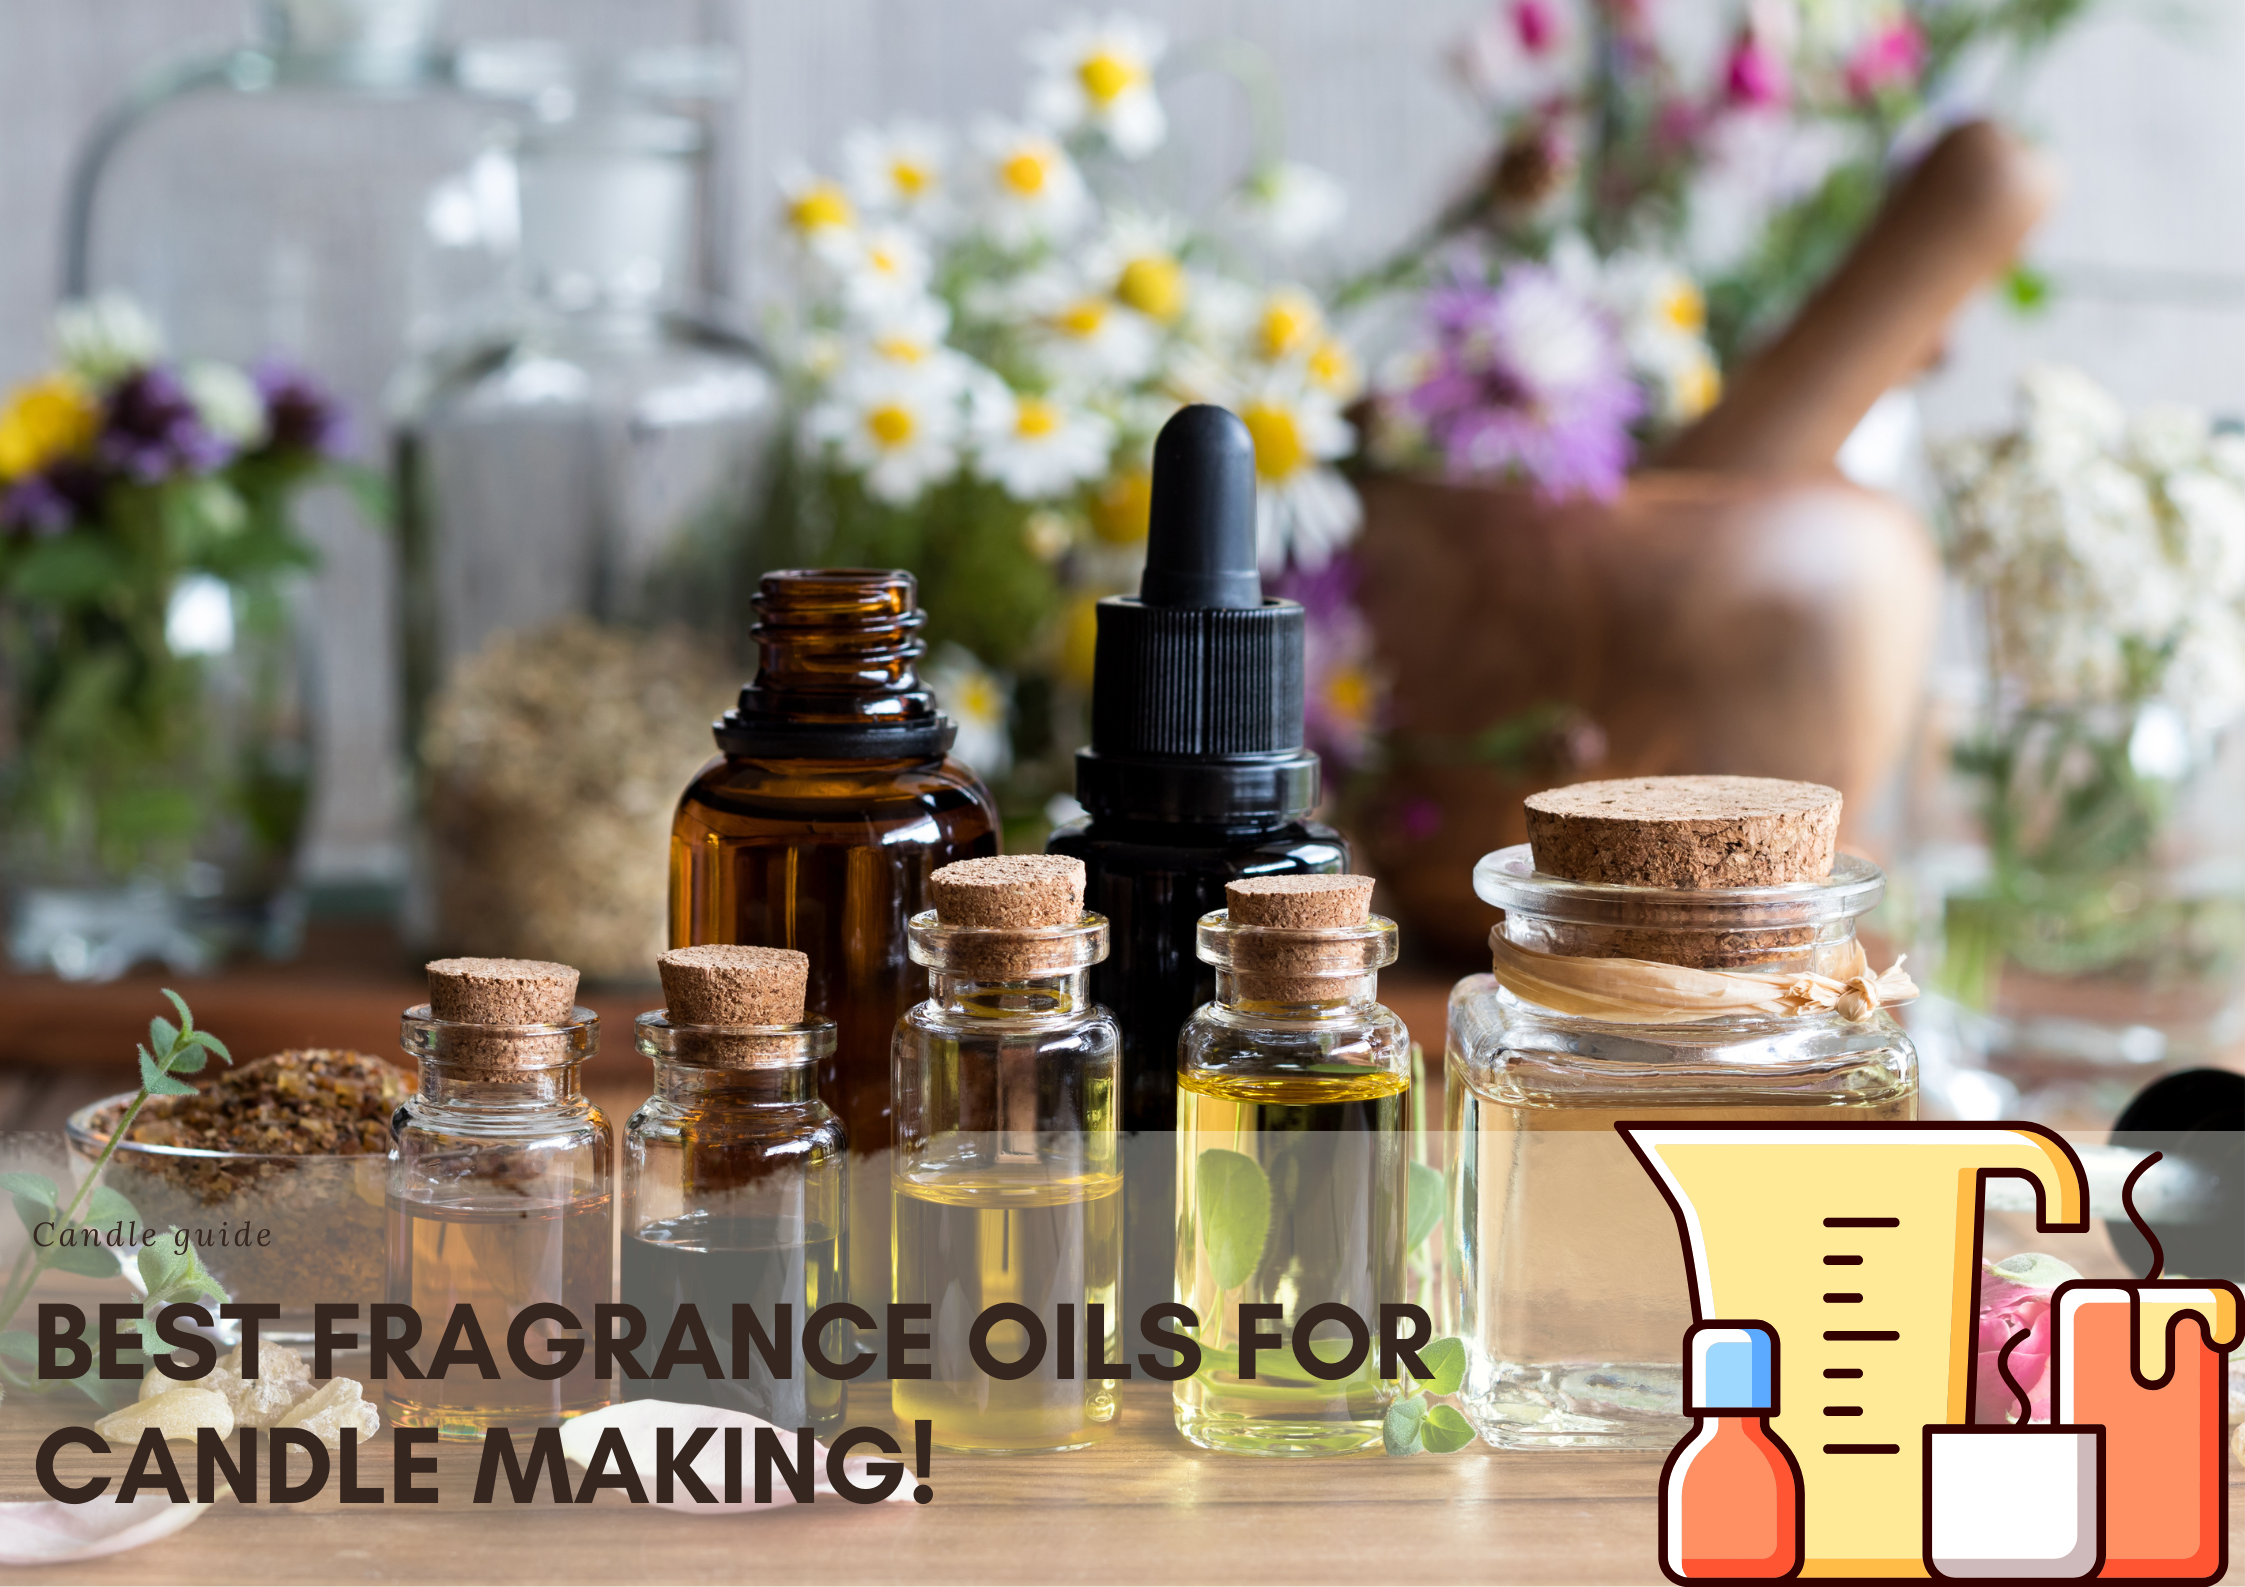 Can You Use Essential Oils For Candle Making?